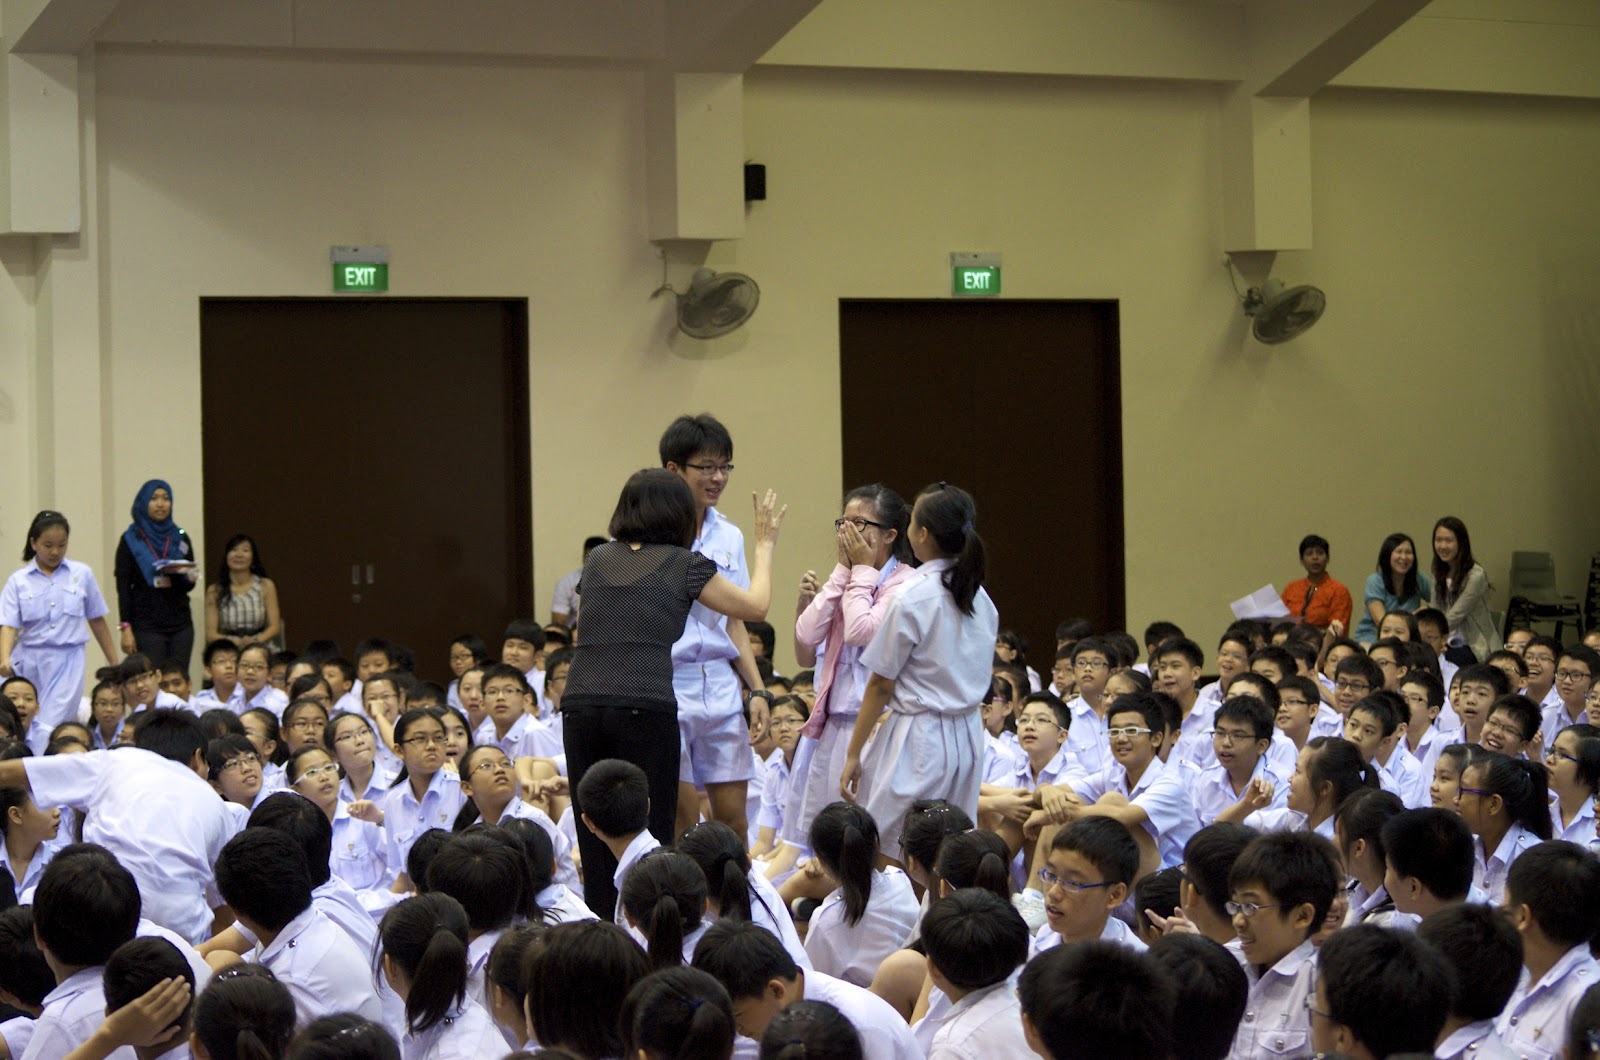 EMRS: Outreach event at Chung Cheng High Yishun Secondary School